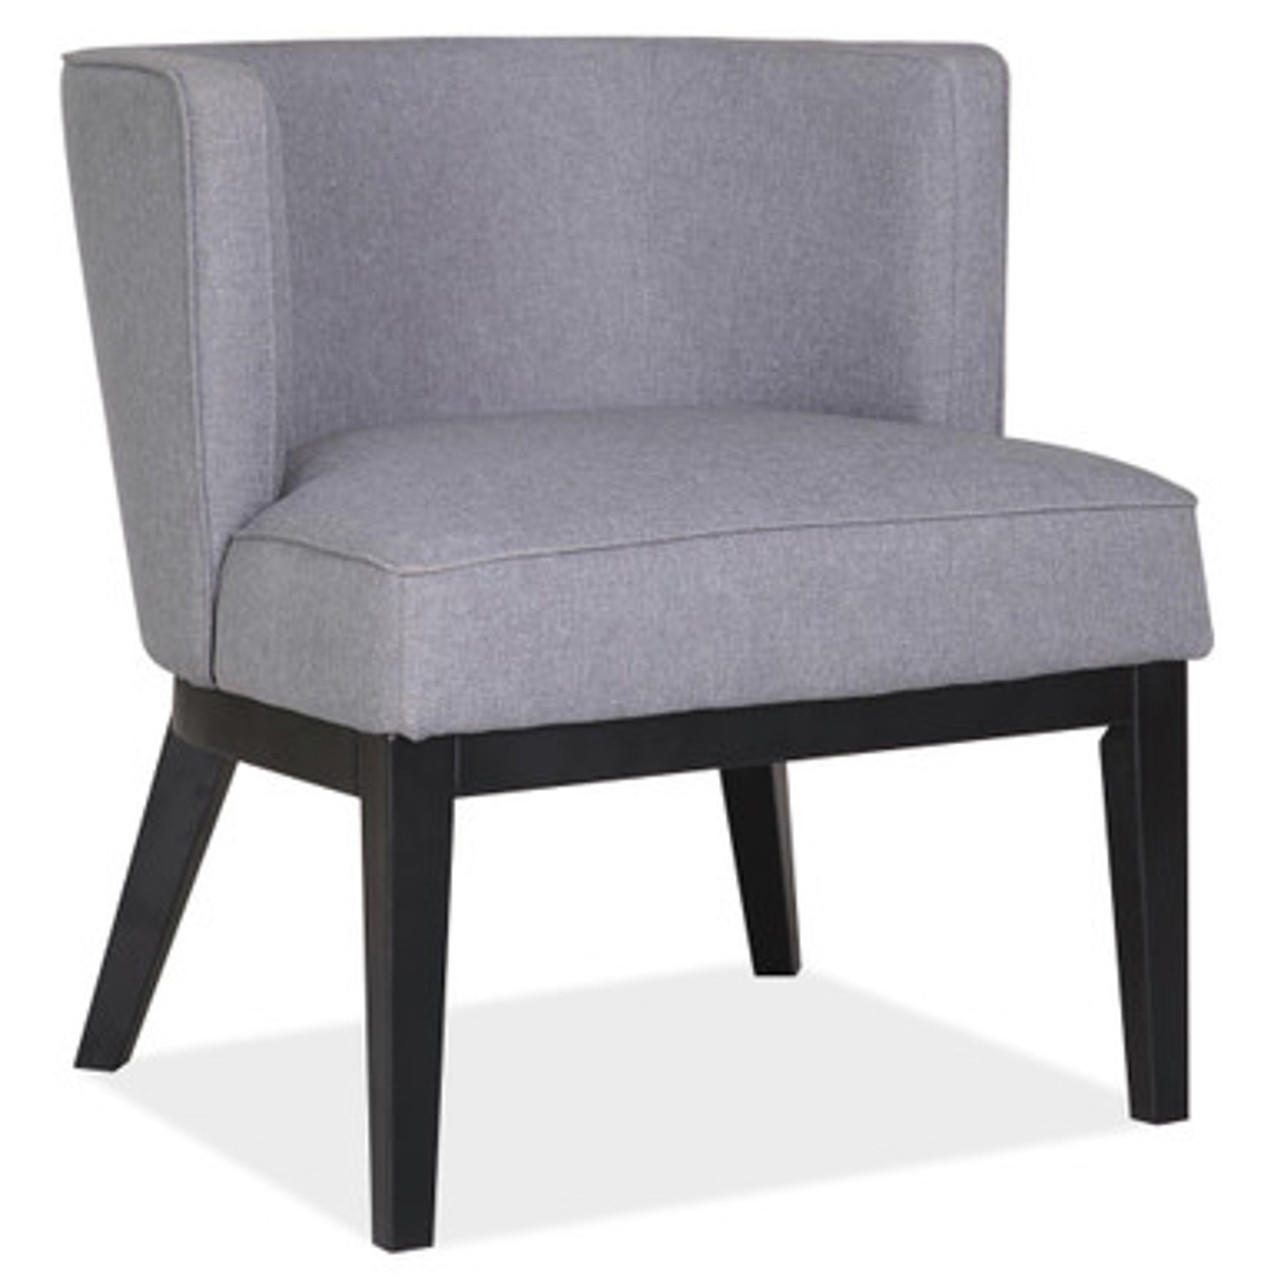  Office Source Bowery Barrel Back Gray Linen Fabric Arm Chair 5209 